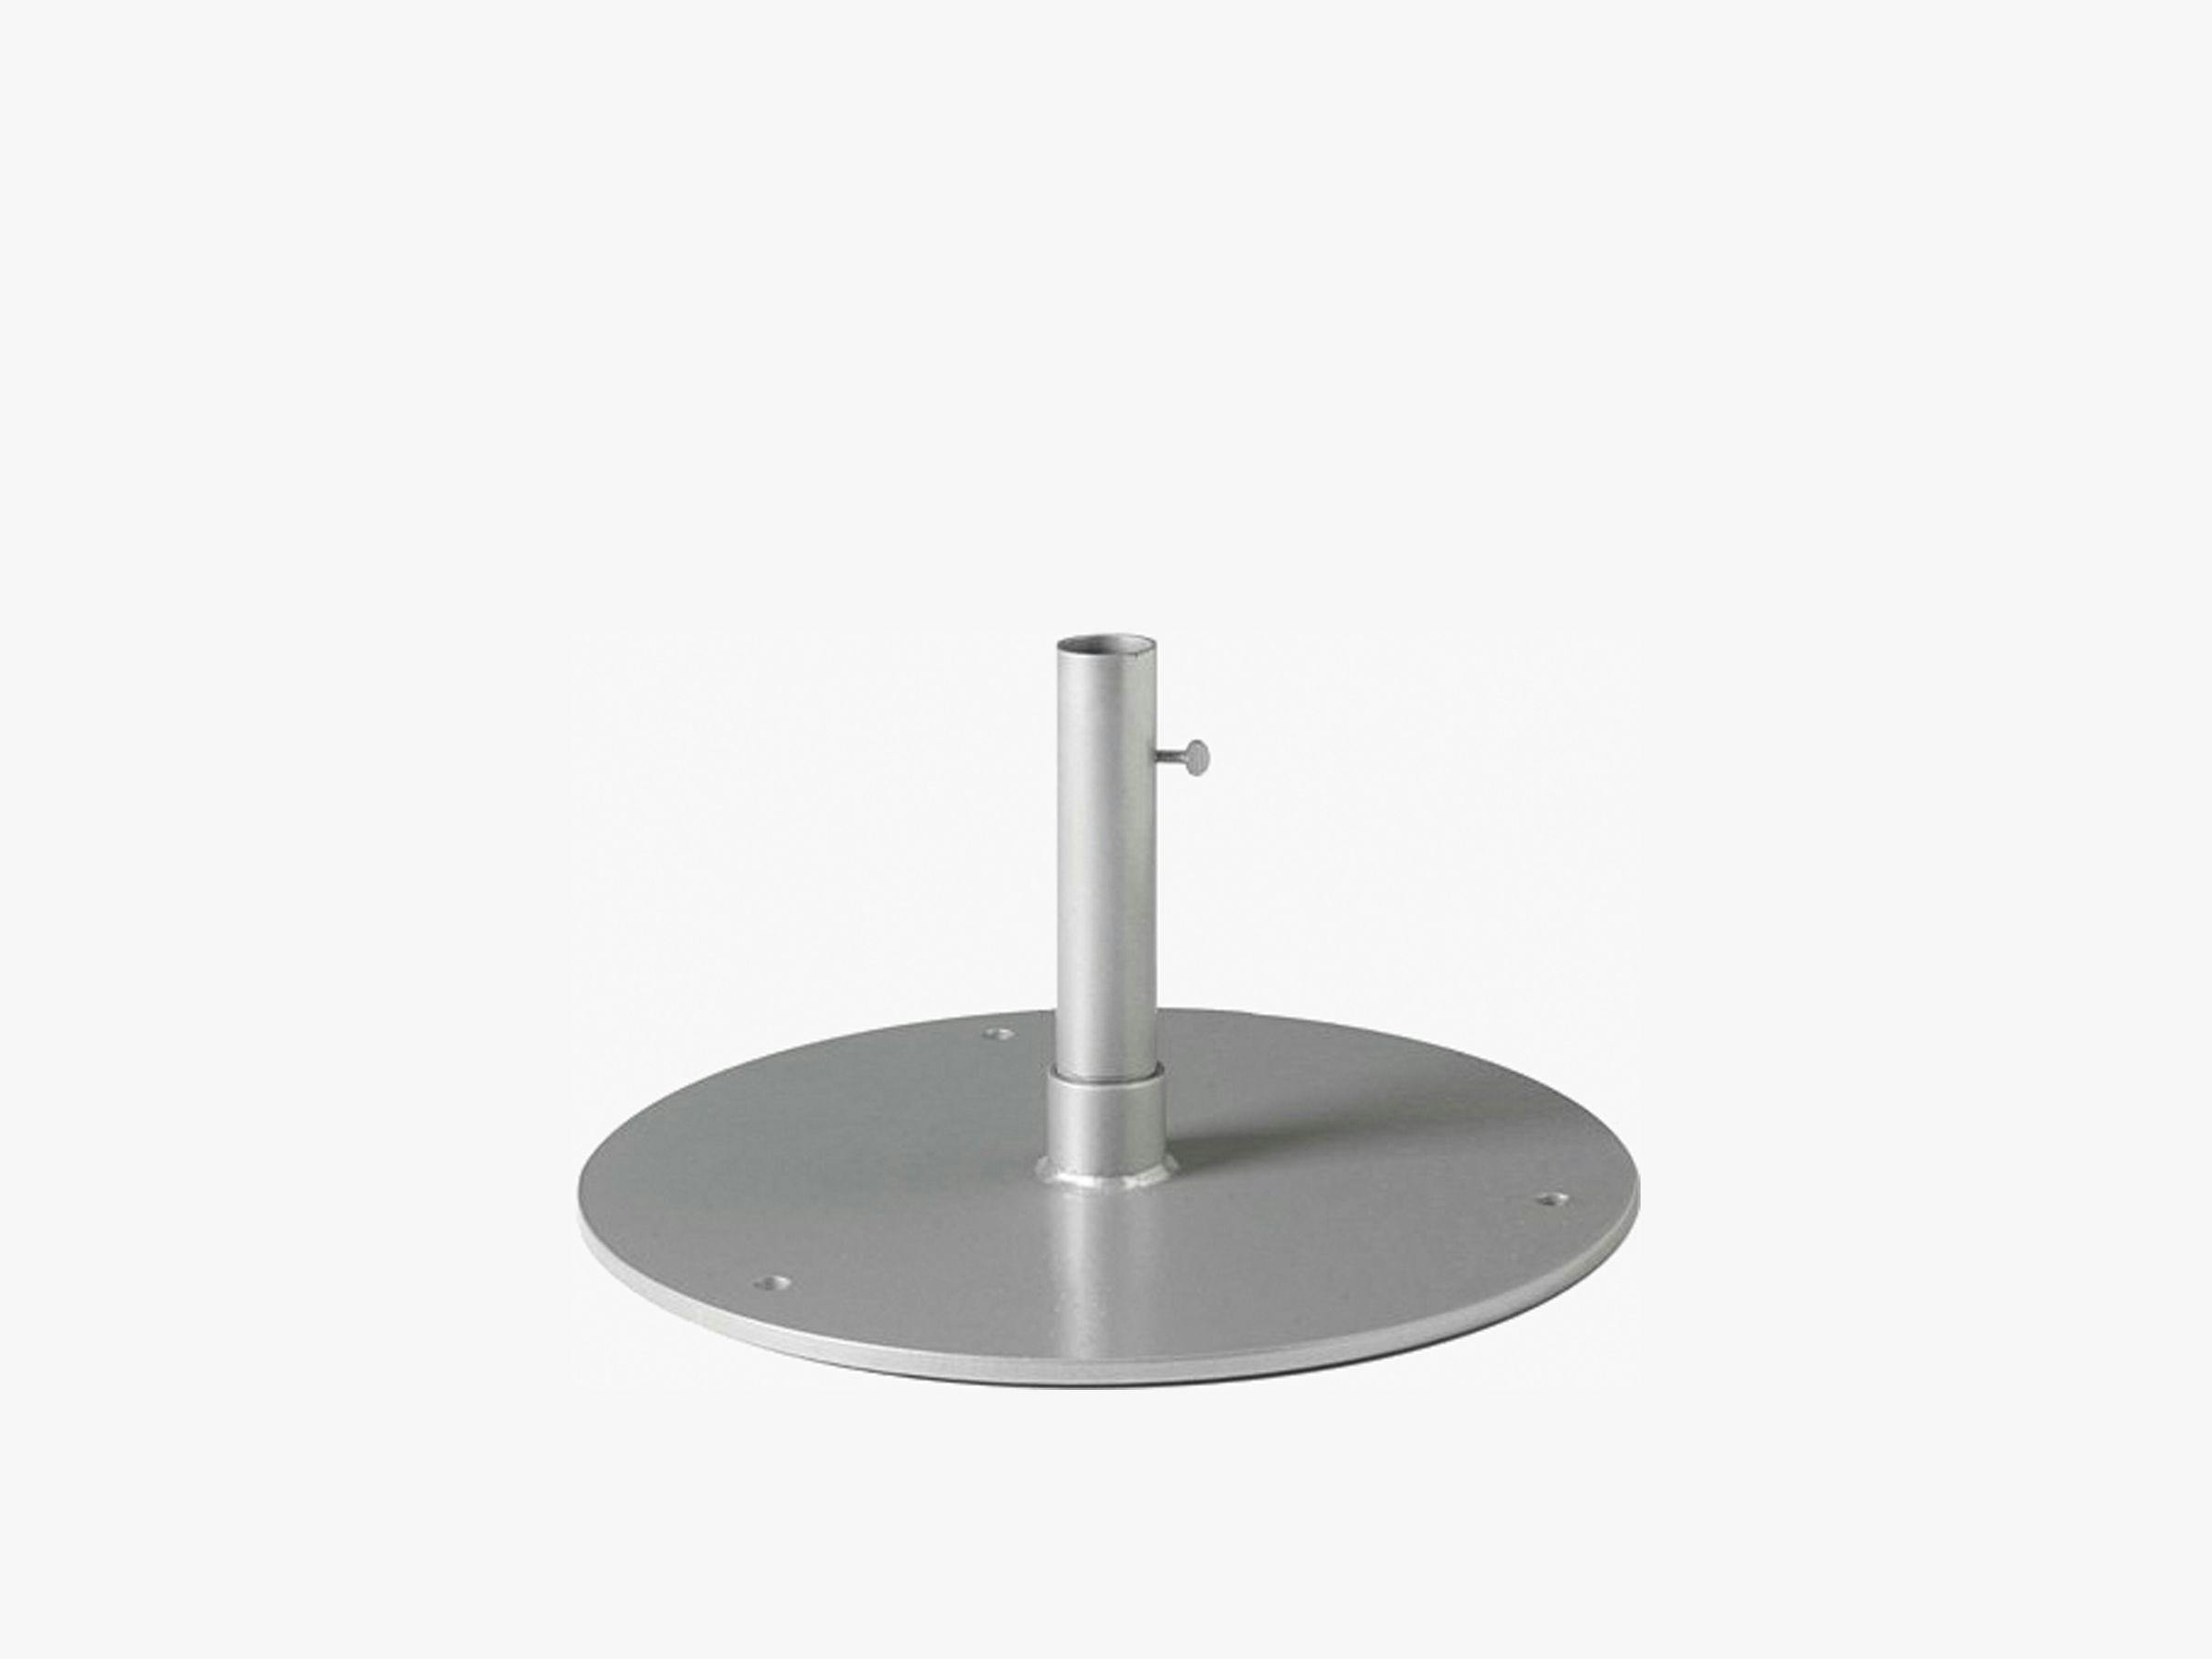 Steel Plate Base, 24" Round, Fits 1.5" Pole, Free Standing